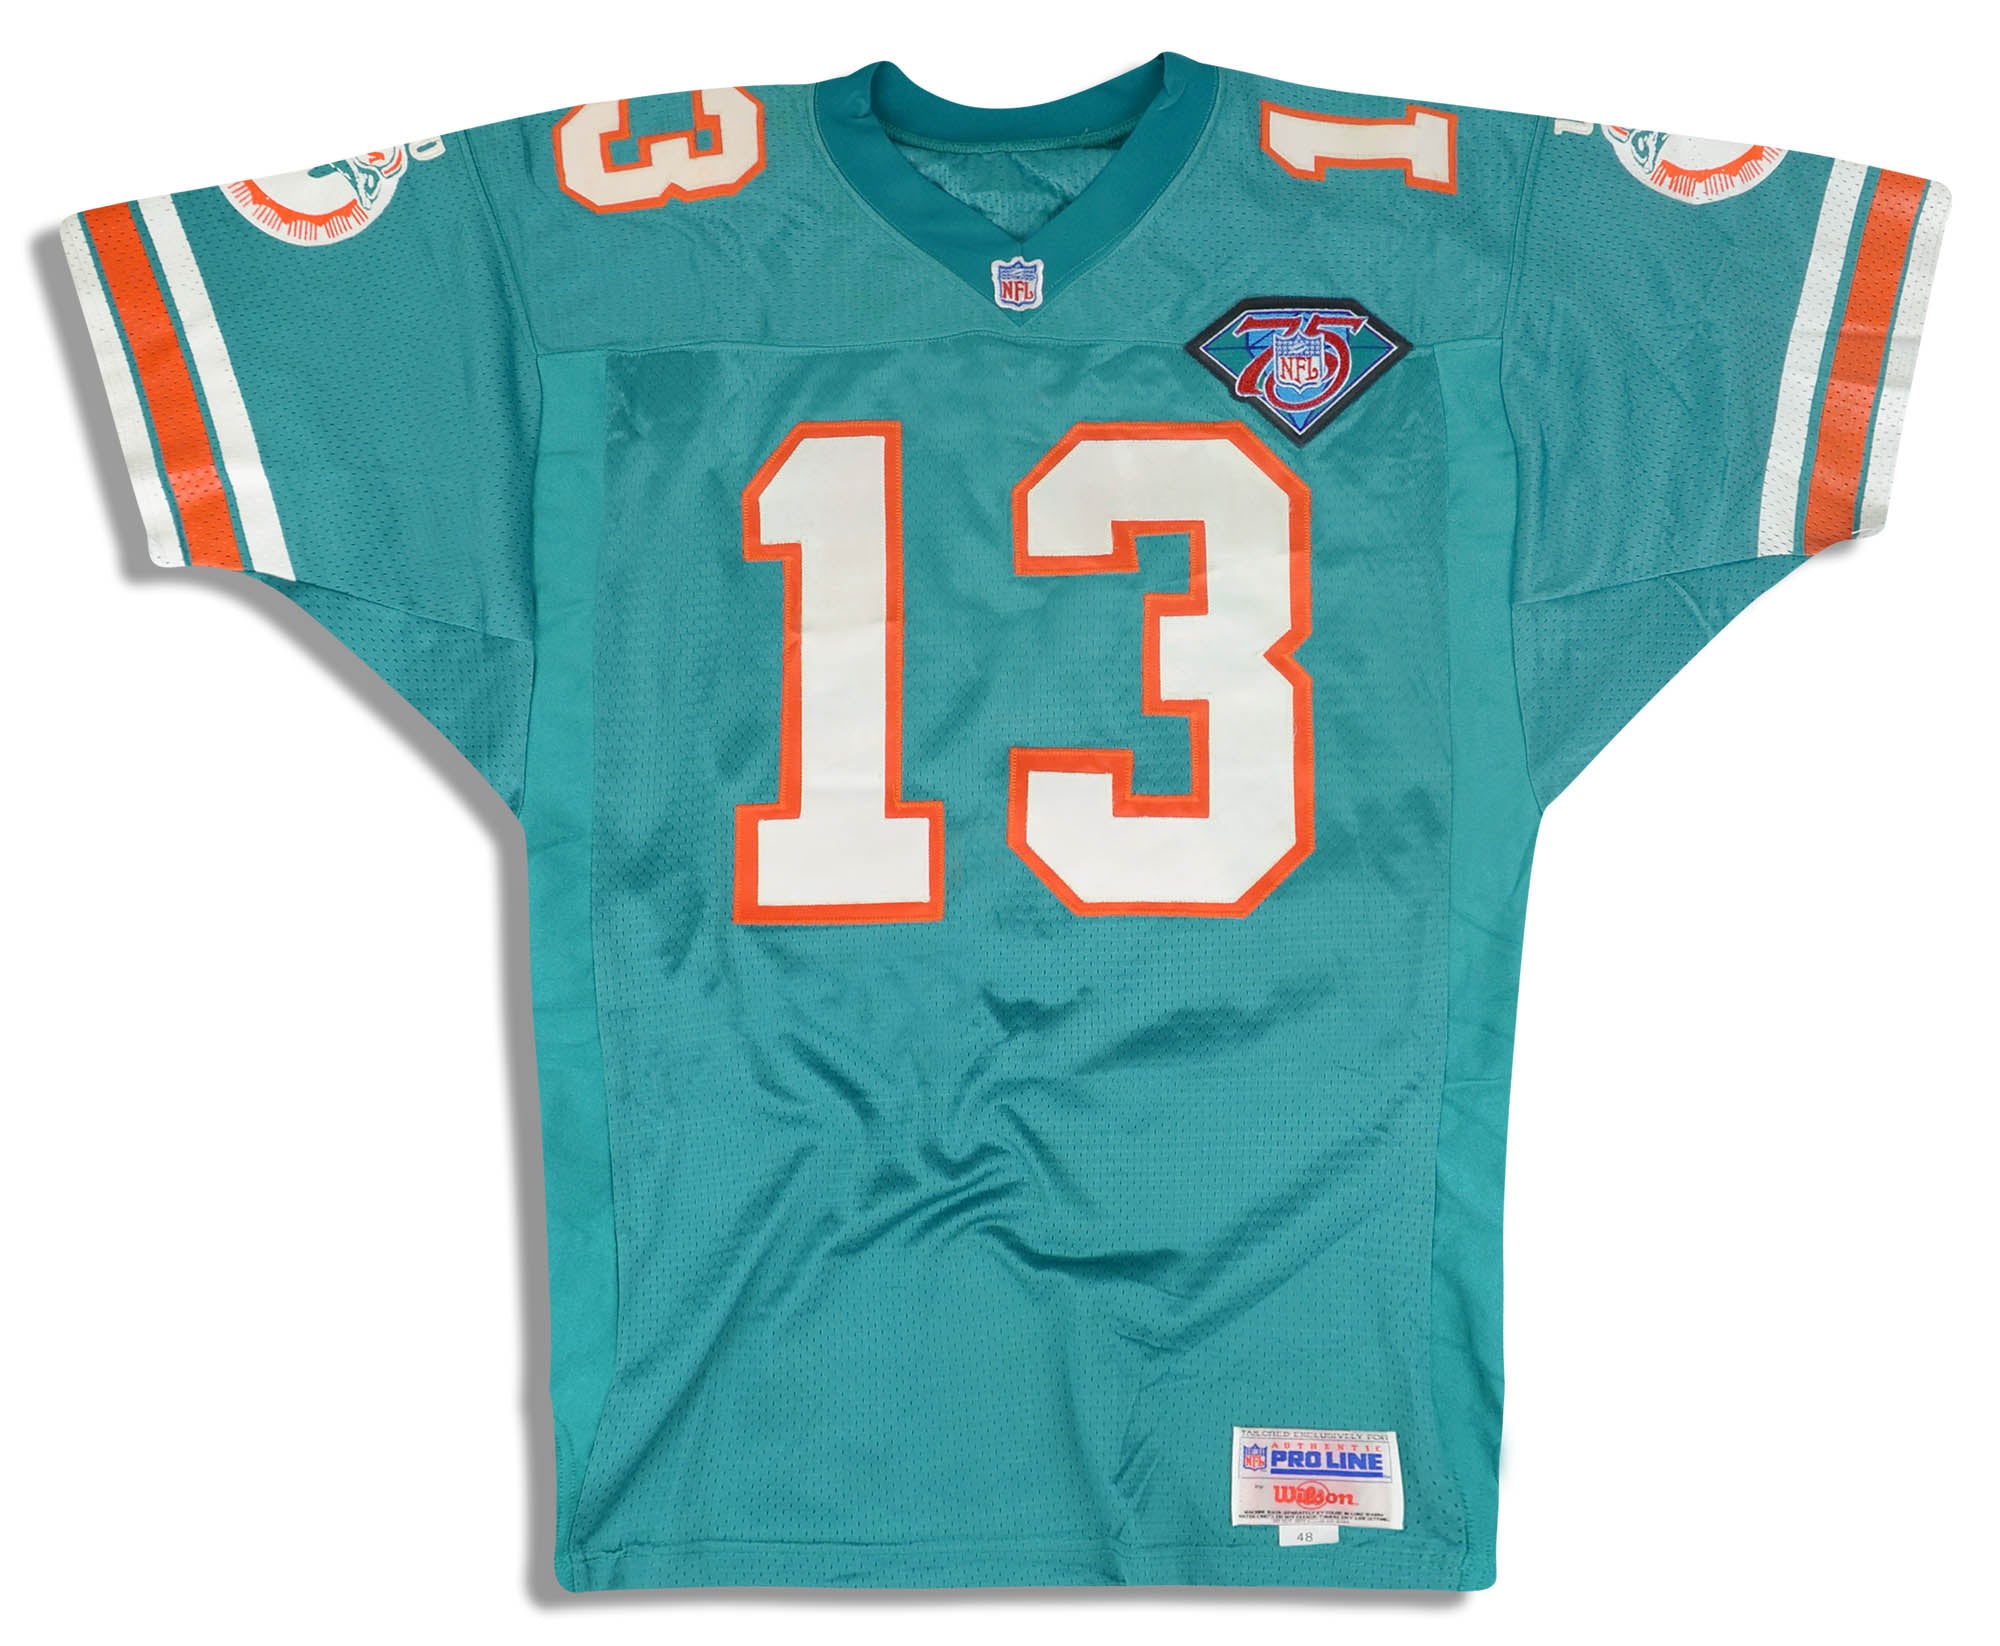 1994 MIAMI DOLPHINS MARINO #13 AUTHENTIC WILSON JERSEY (HOME) XL